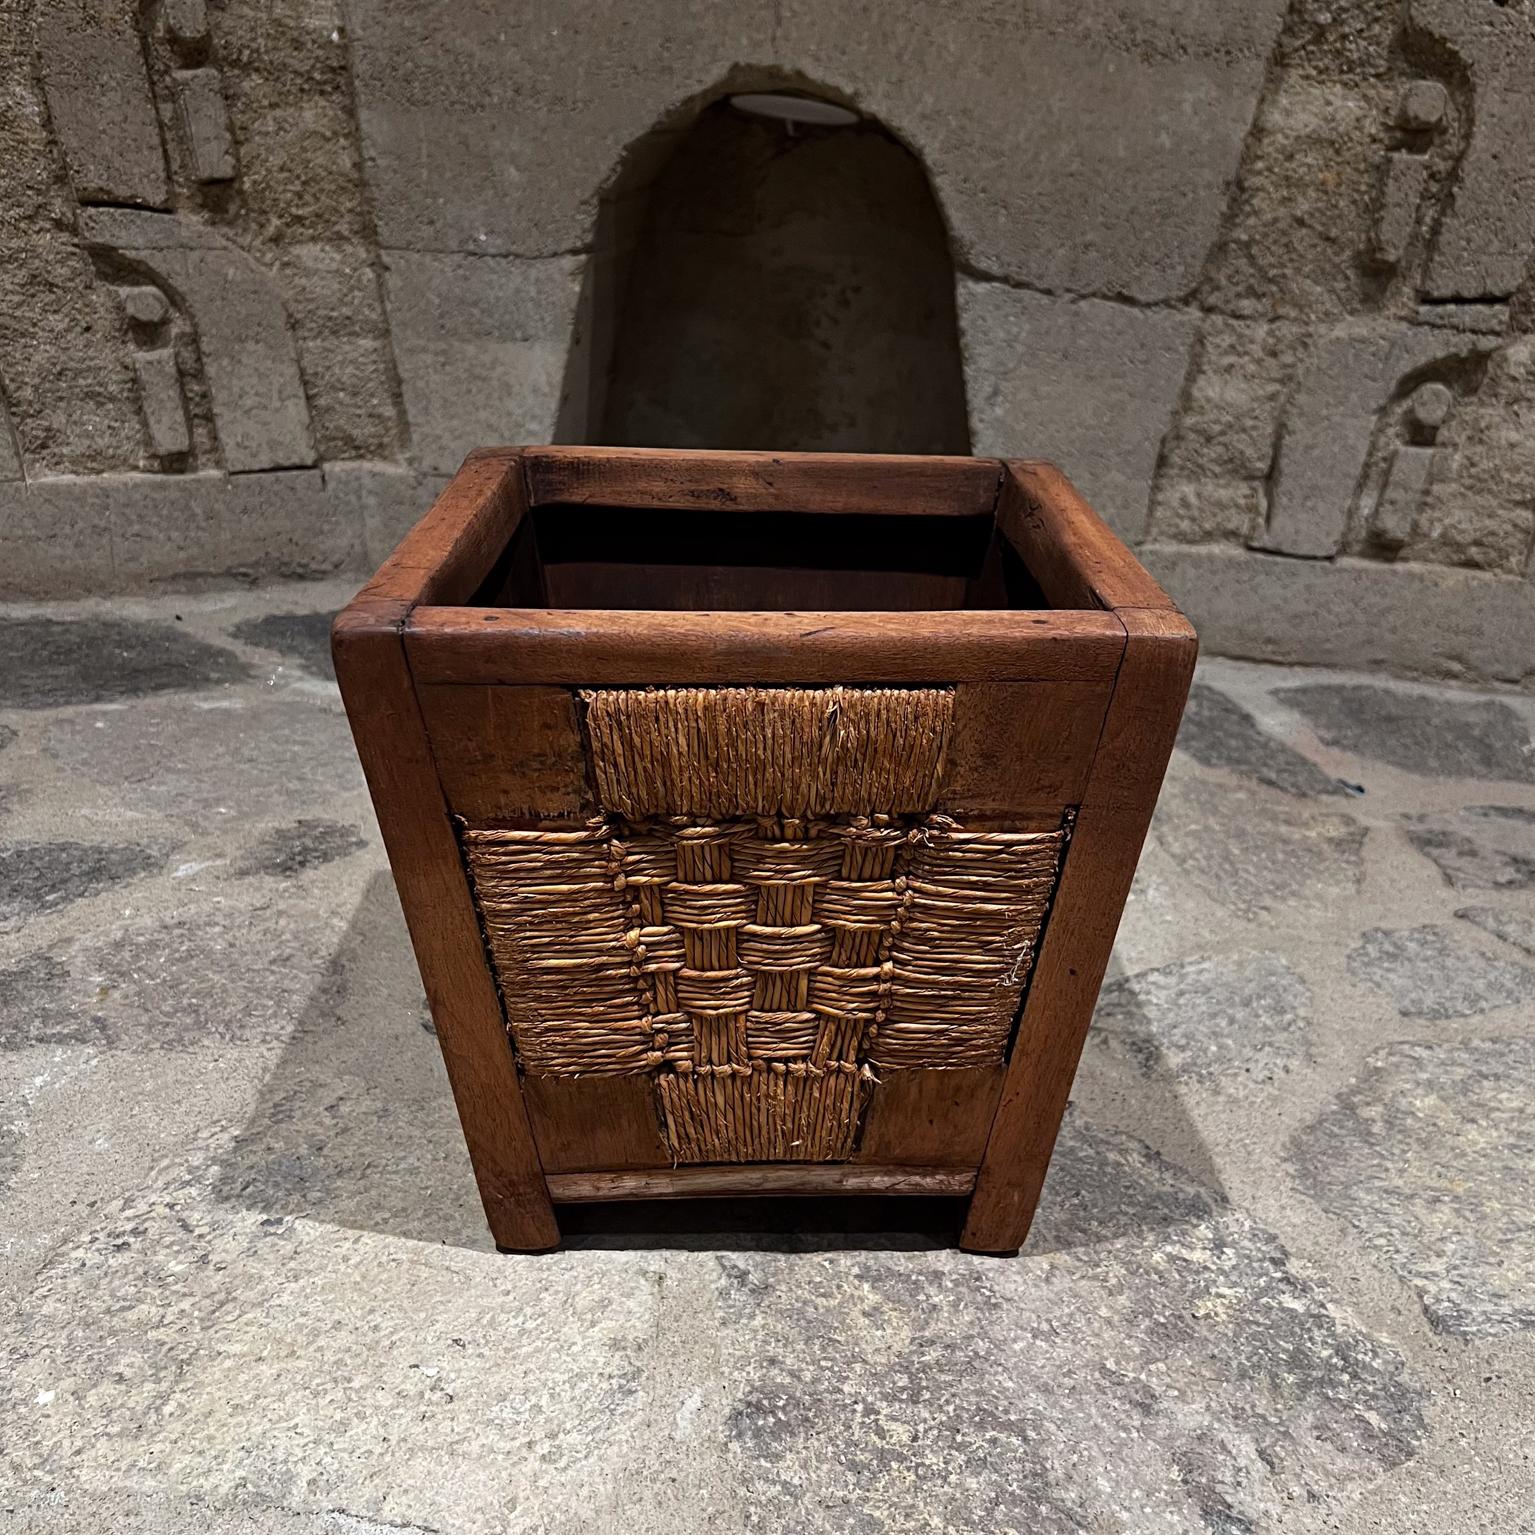 1940s Basket in mahogany wood and woven palm.
Made in Mexico
Unmarked
Attributed to Michael Van Beuren of Domus in Mexico of Bauhaus tradition.
Great as a planter.
It appears the original finish was removed at one point.
A vintage patina gives it